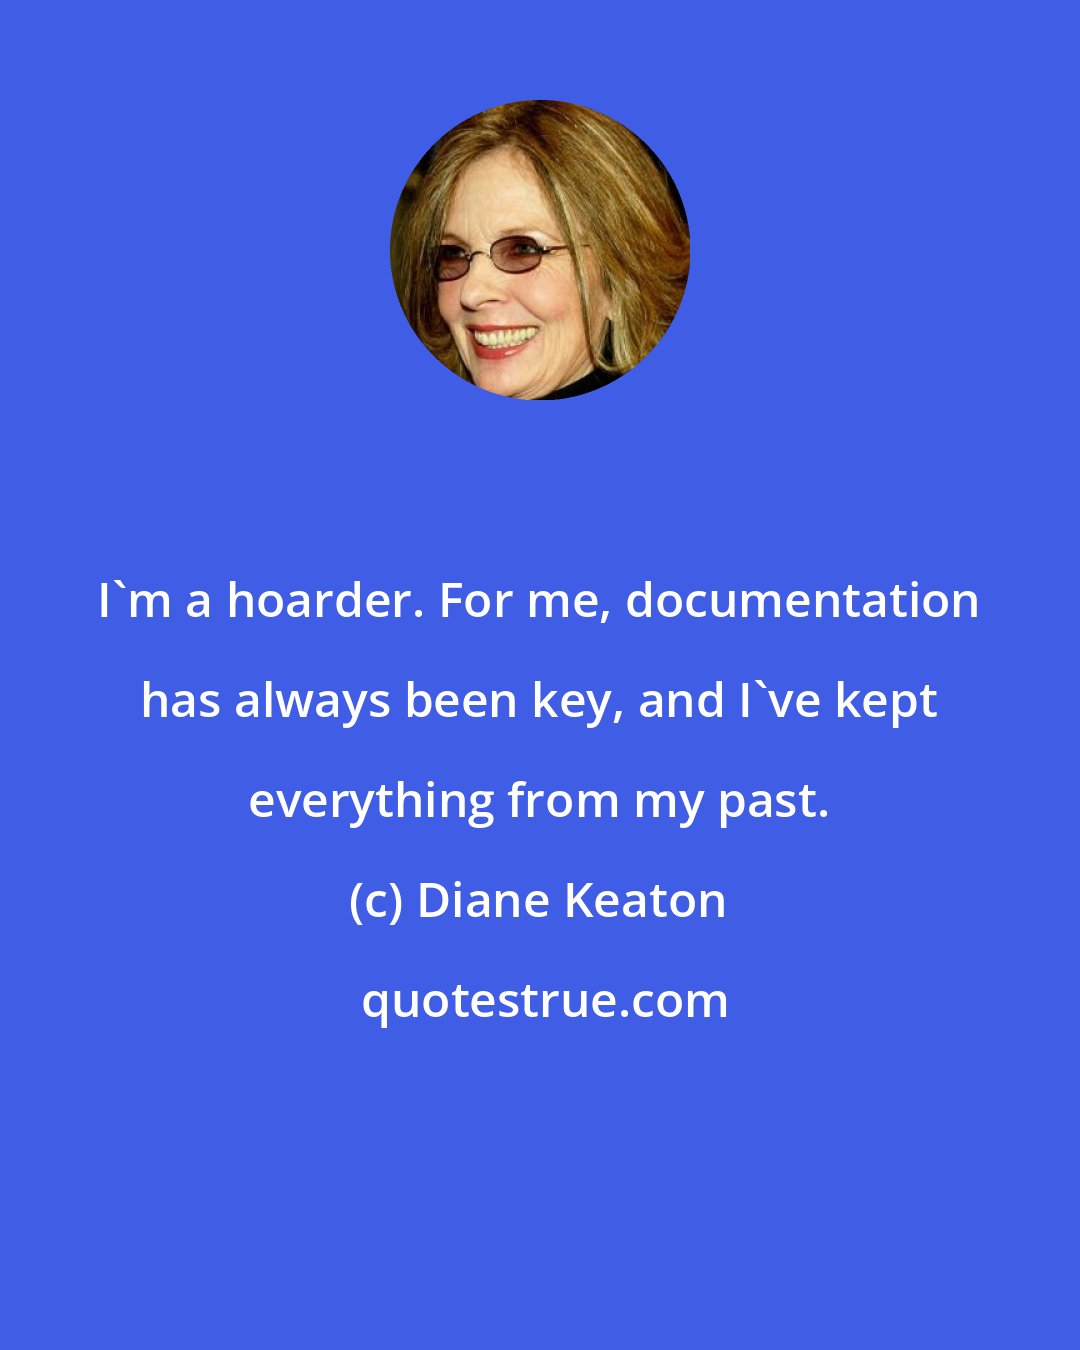 Diane Keaton: I'm a hoarder. For me, documentation has always been key, and I've kept everything from my past.